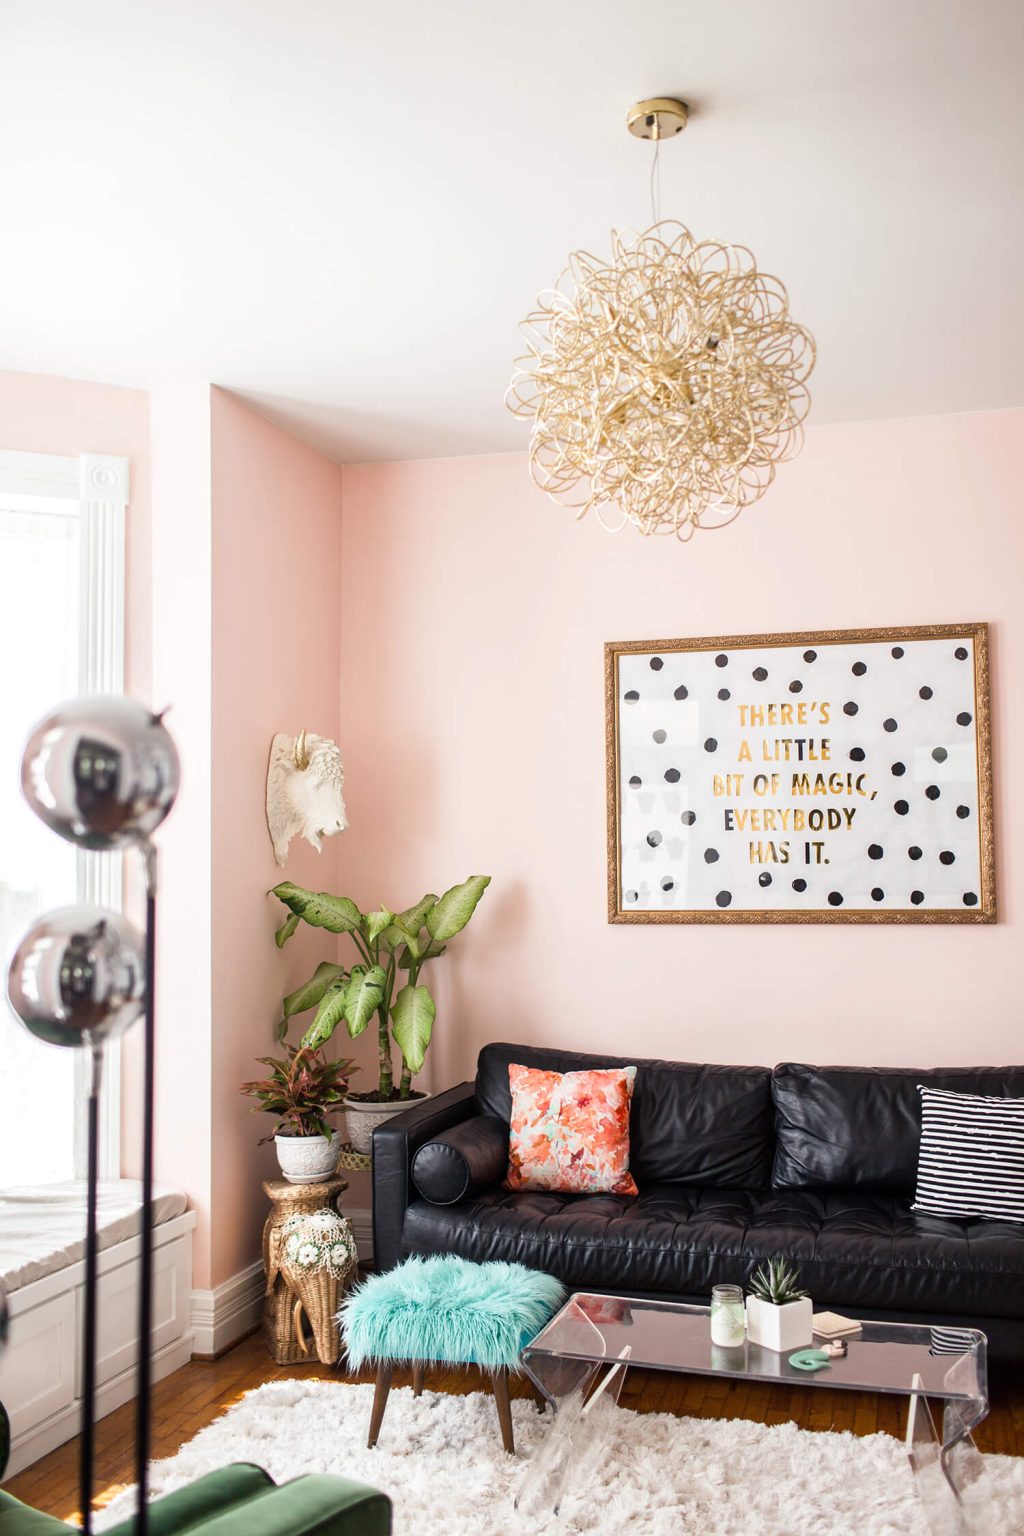 A Guide To The 10 Most Popular Interior Design Styles Style Curator